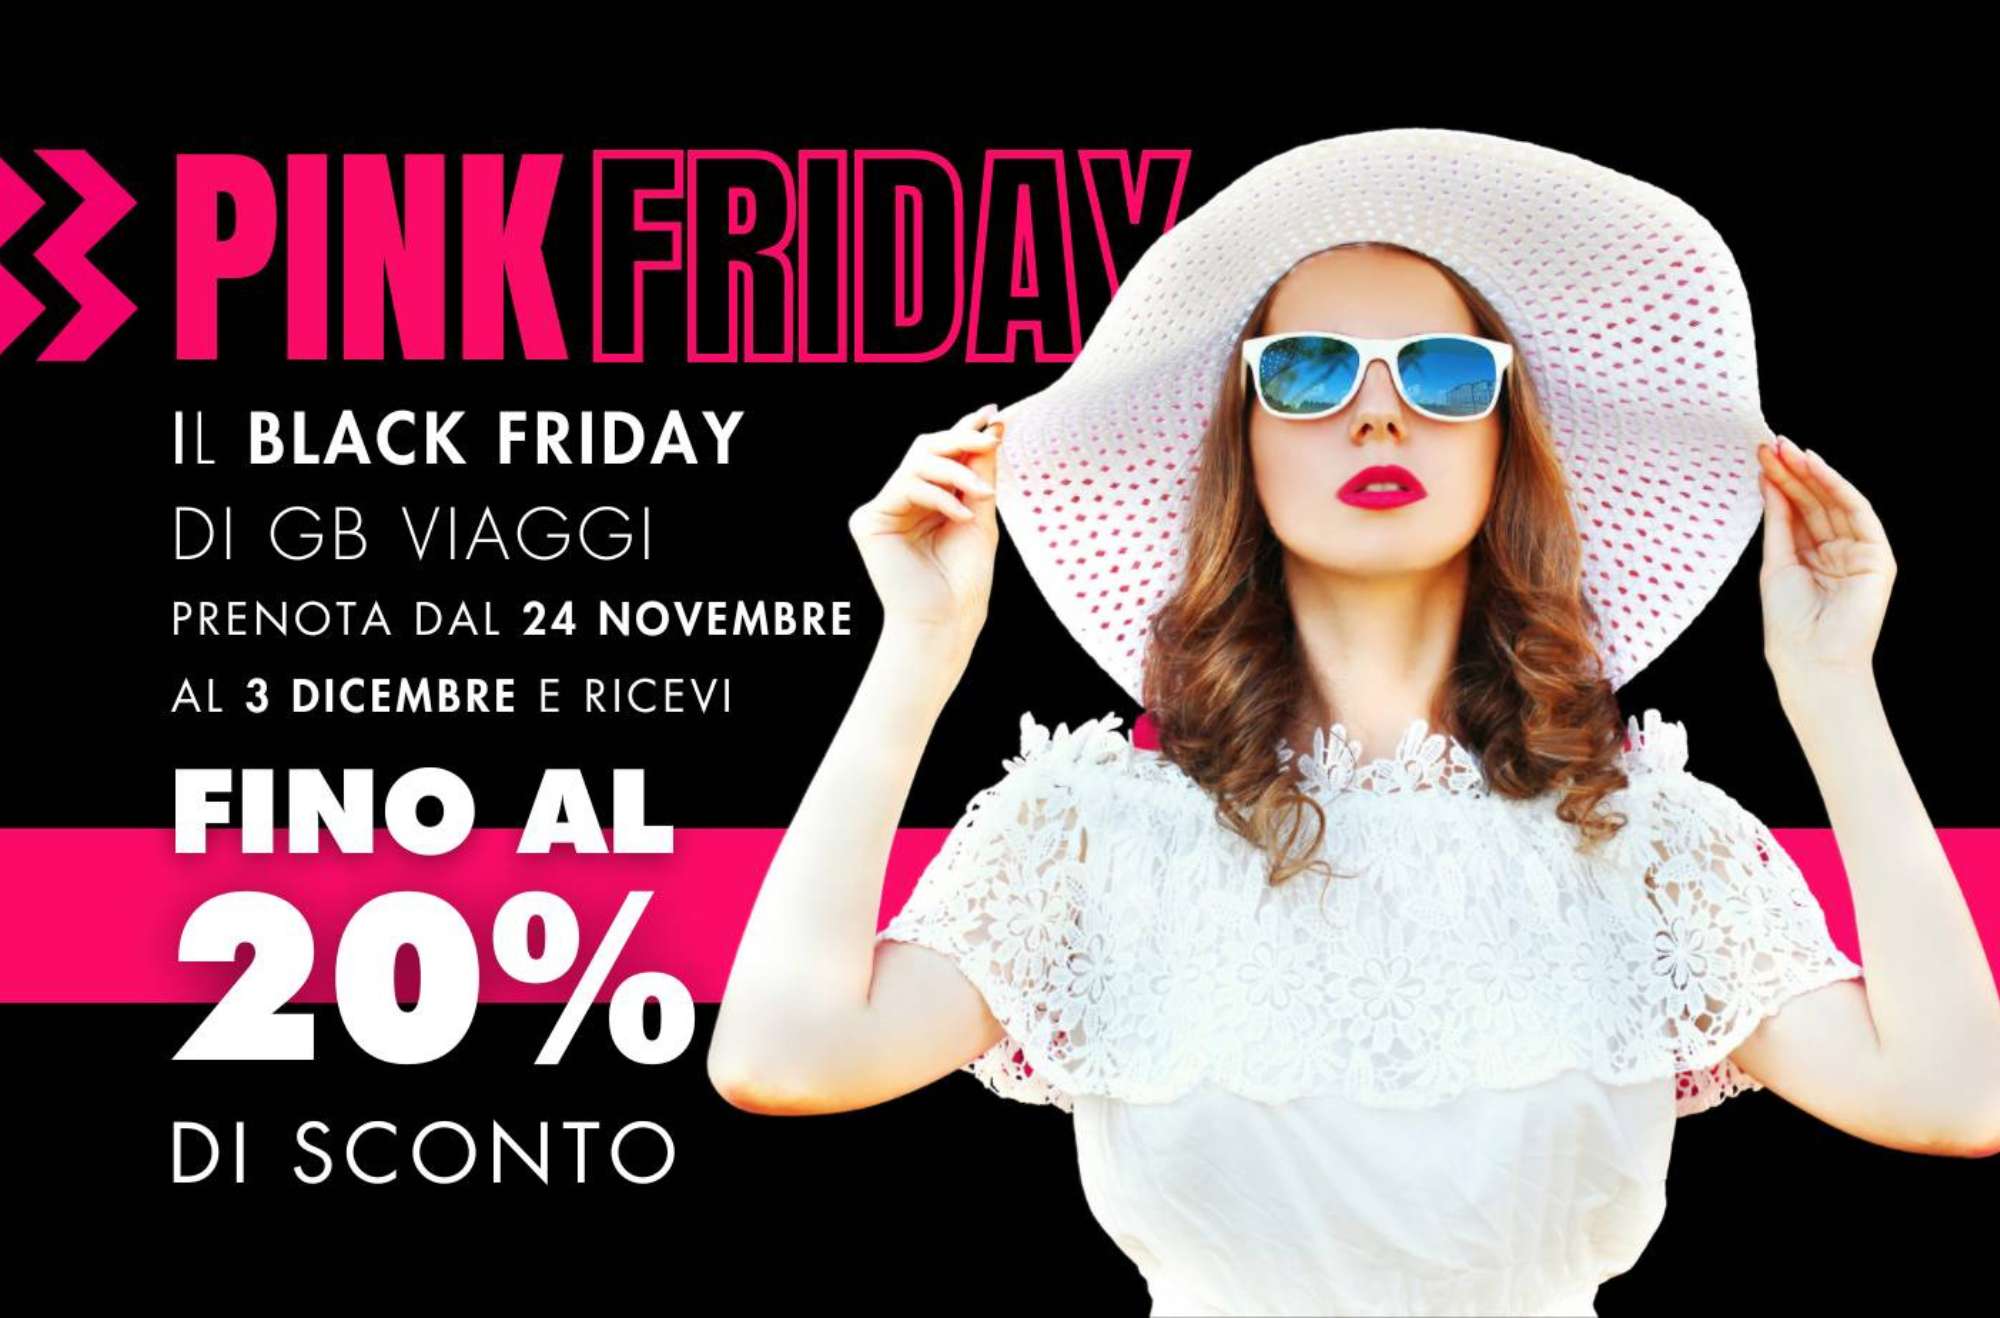 Pink Friday - black friday delle vacanze